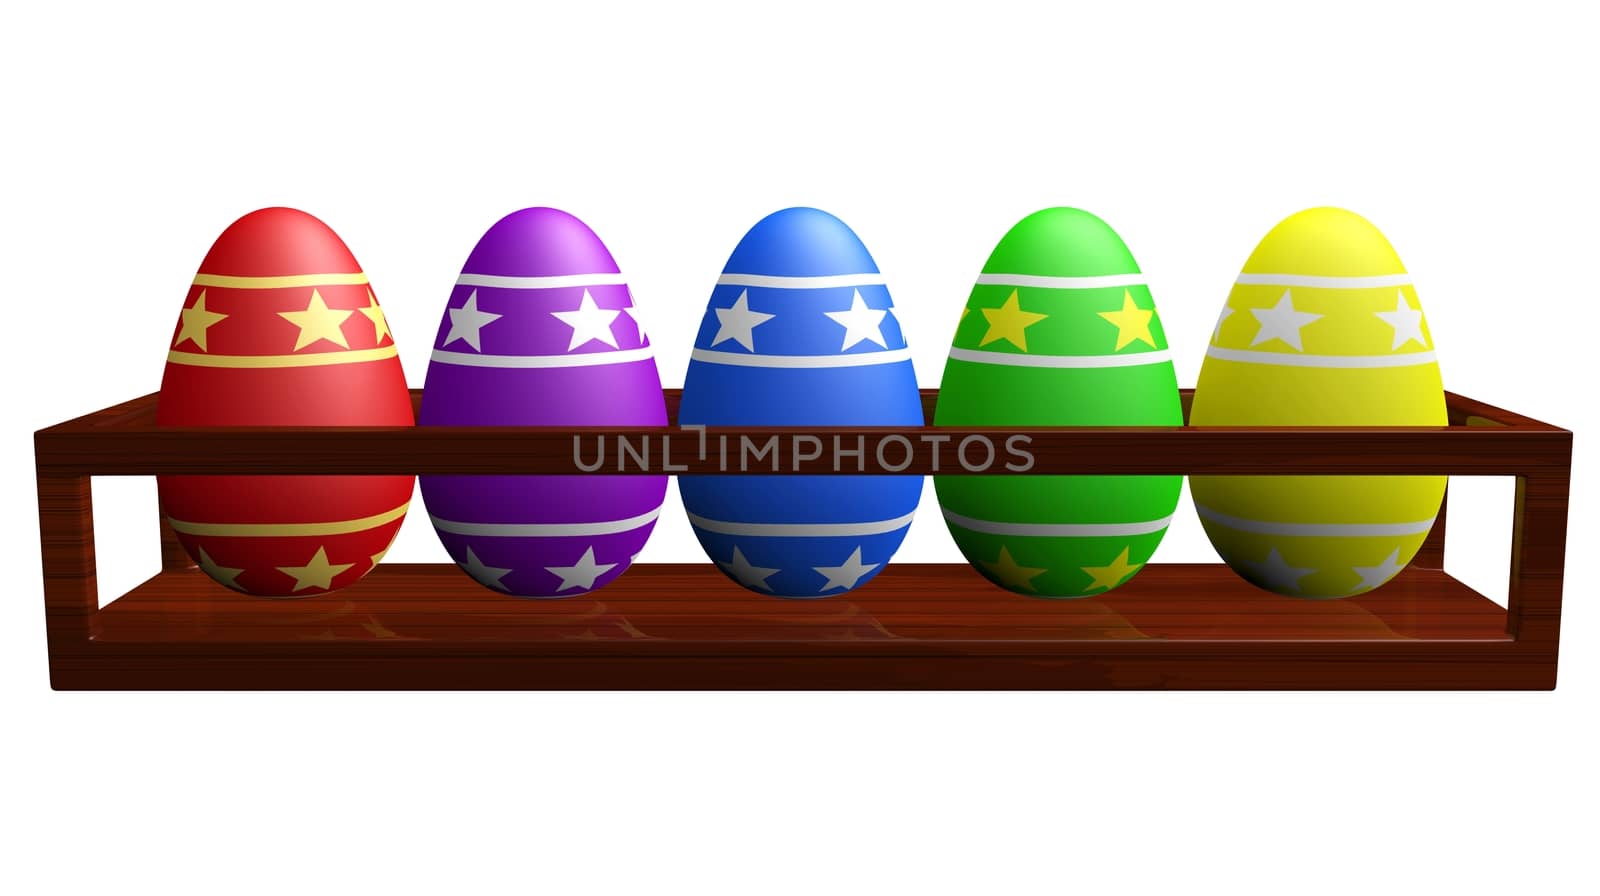 Colorful Easter eggs with stars design placed in a long wooden rack. 
